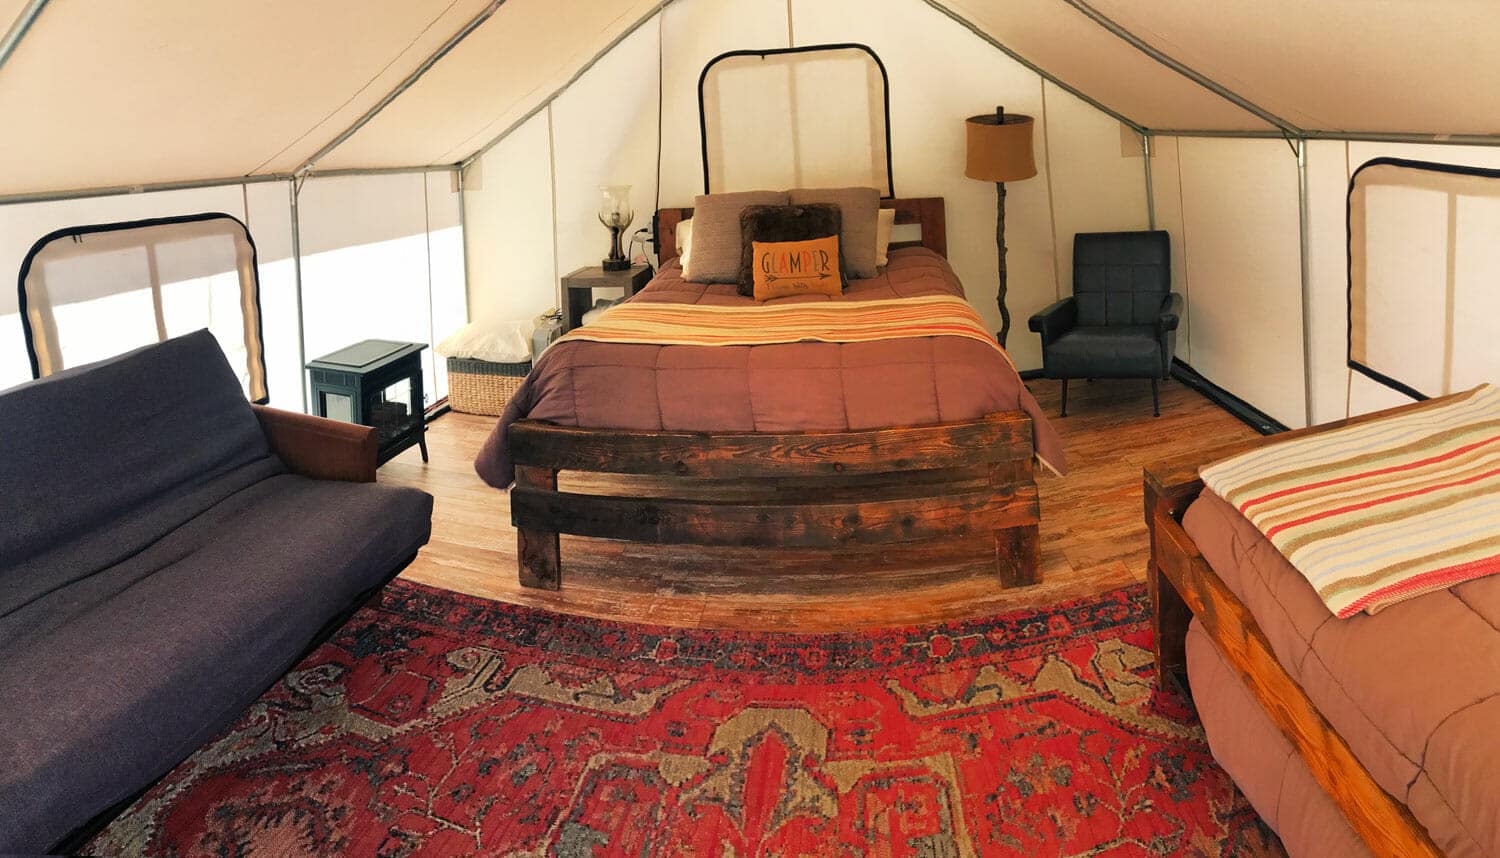 Take a peek inside one of our Glamping tents near Zion National Park.